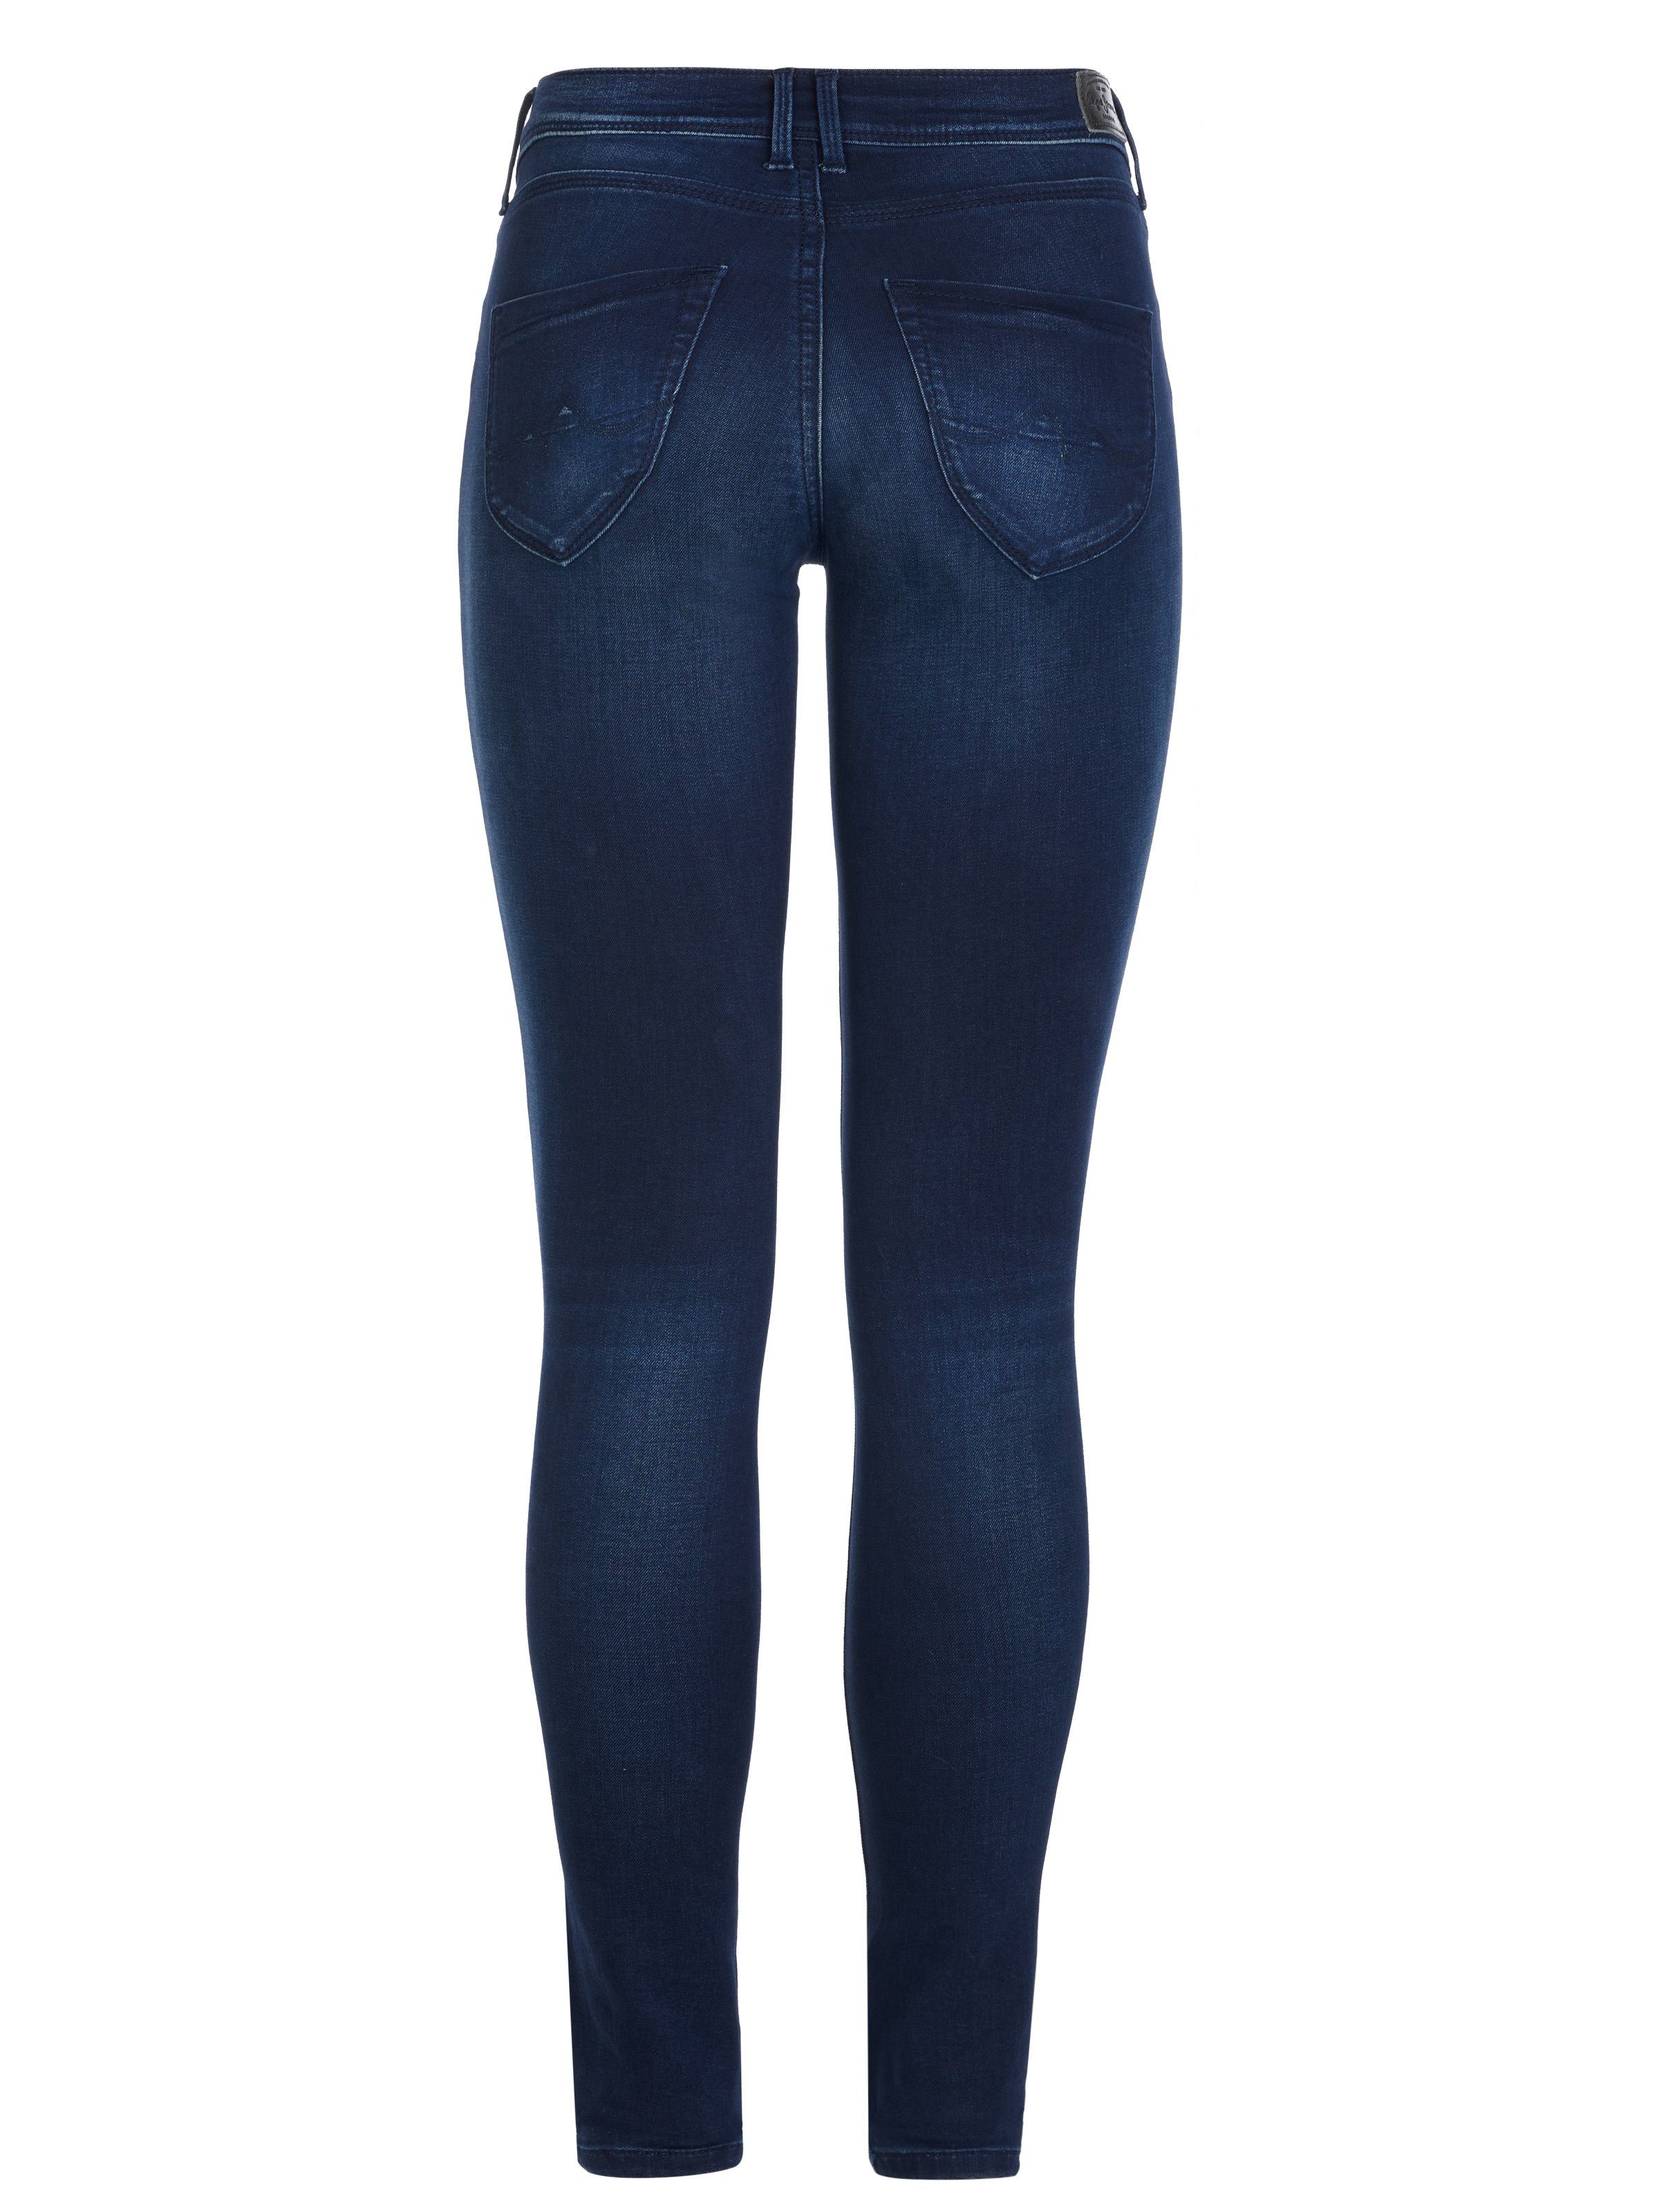 Jeans Jeans Pepe Slim-fit-Jeans Pepe Jeans